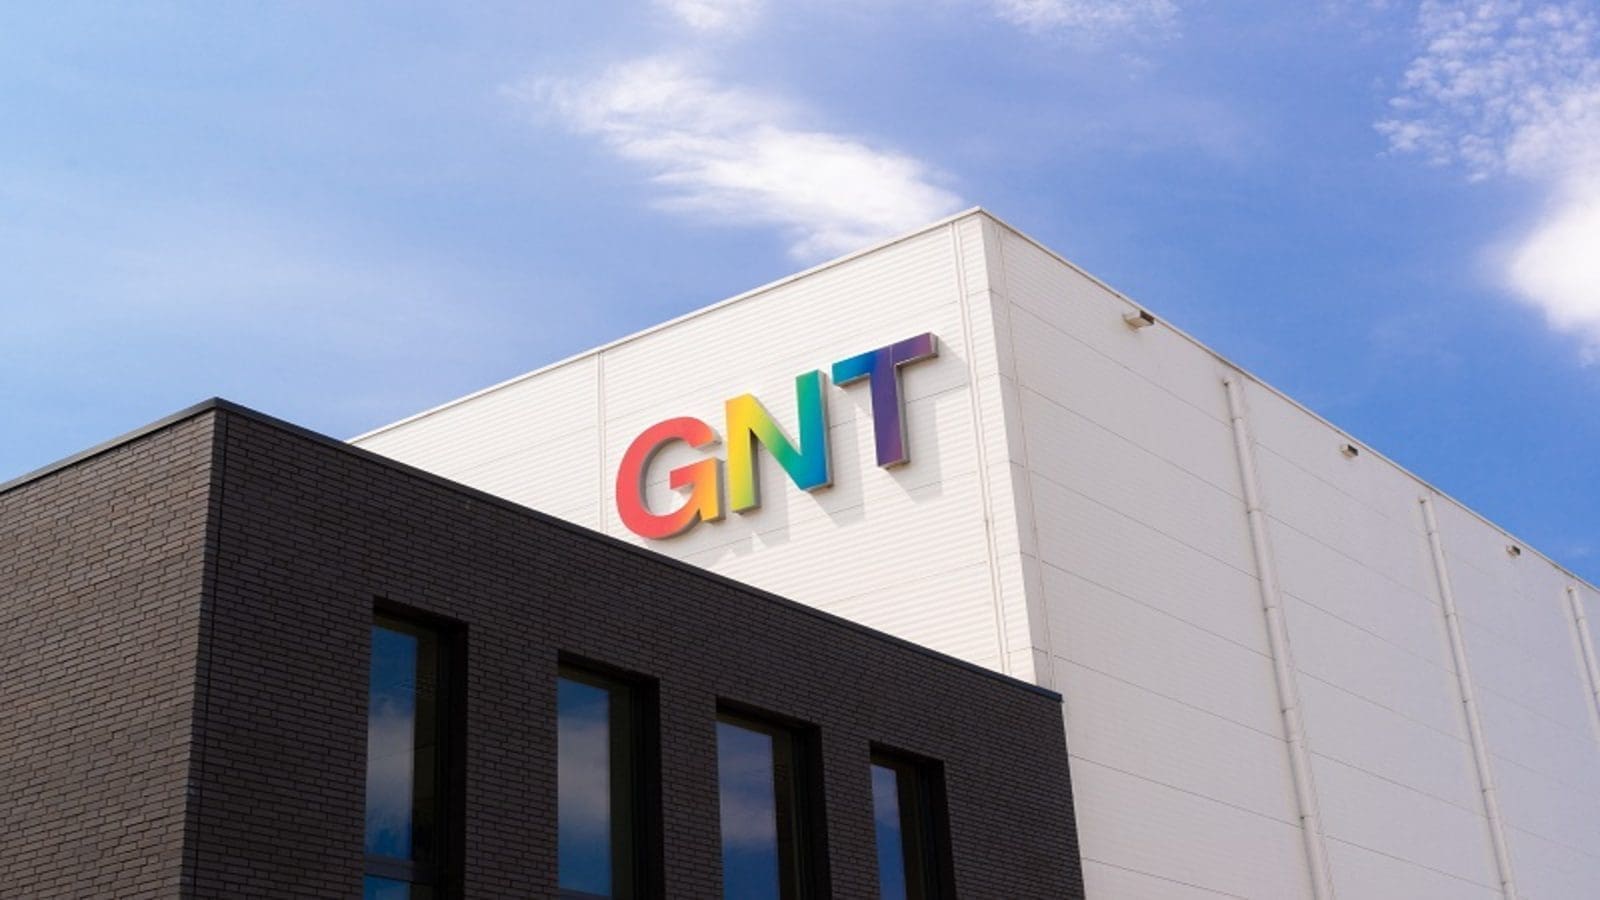 Natural color supplier GNT invests US$30m in North American facility expansion